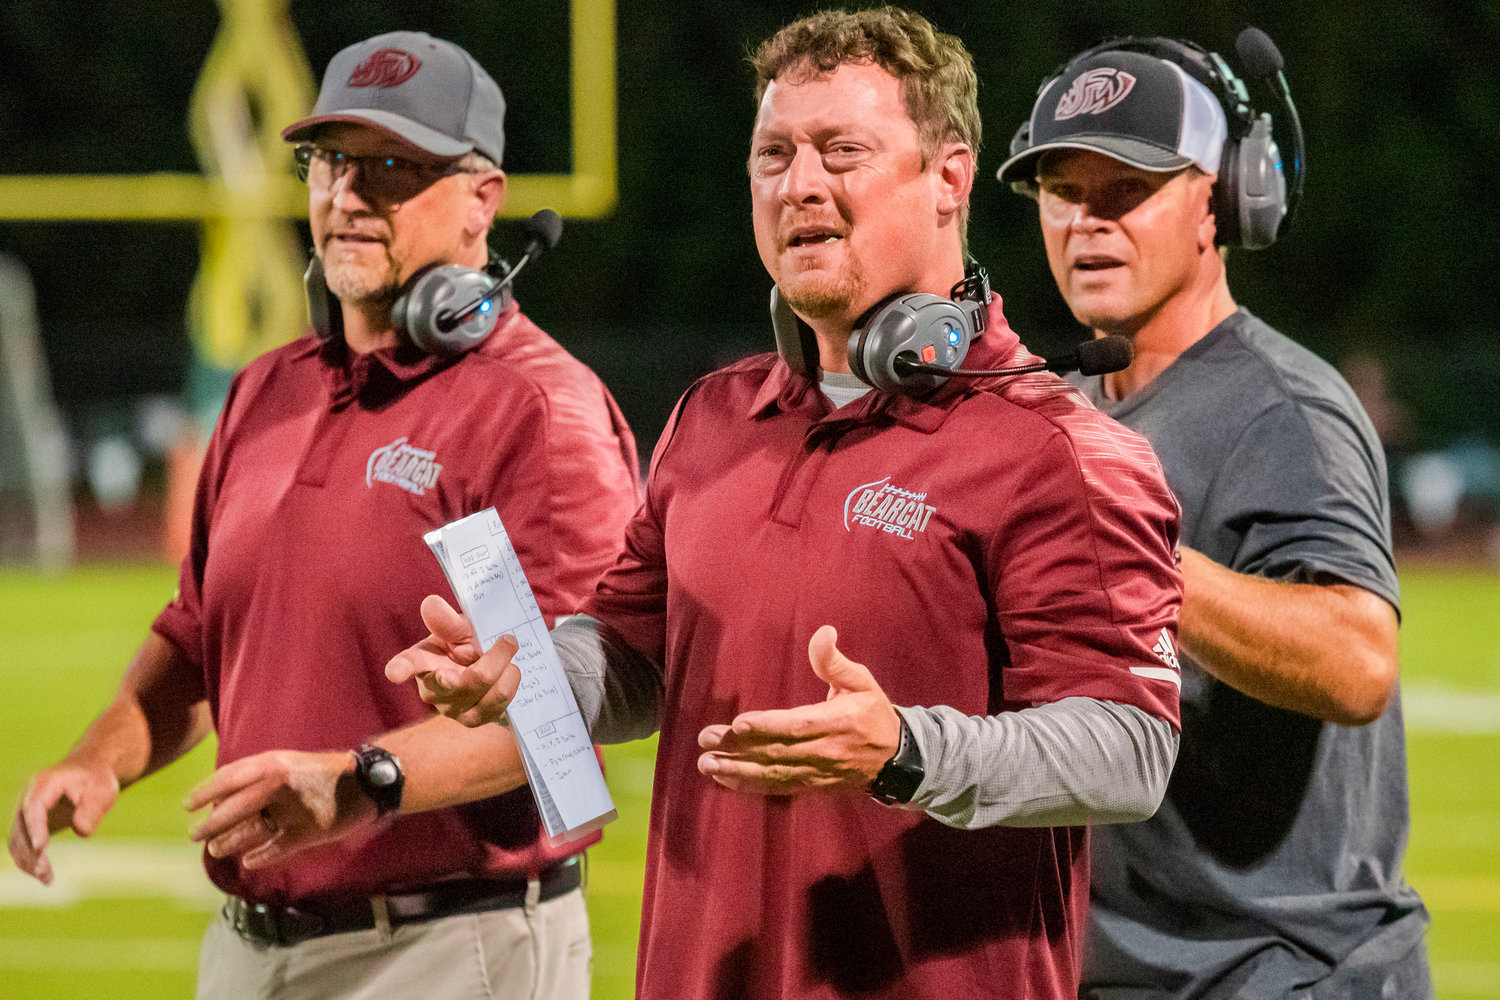 Bearcat’s Head Coach Dan Hill is joined by staff while questioning a flag on the field following a play Friday night.